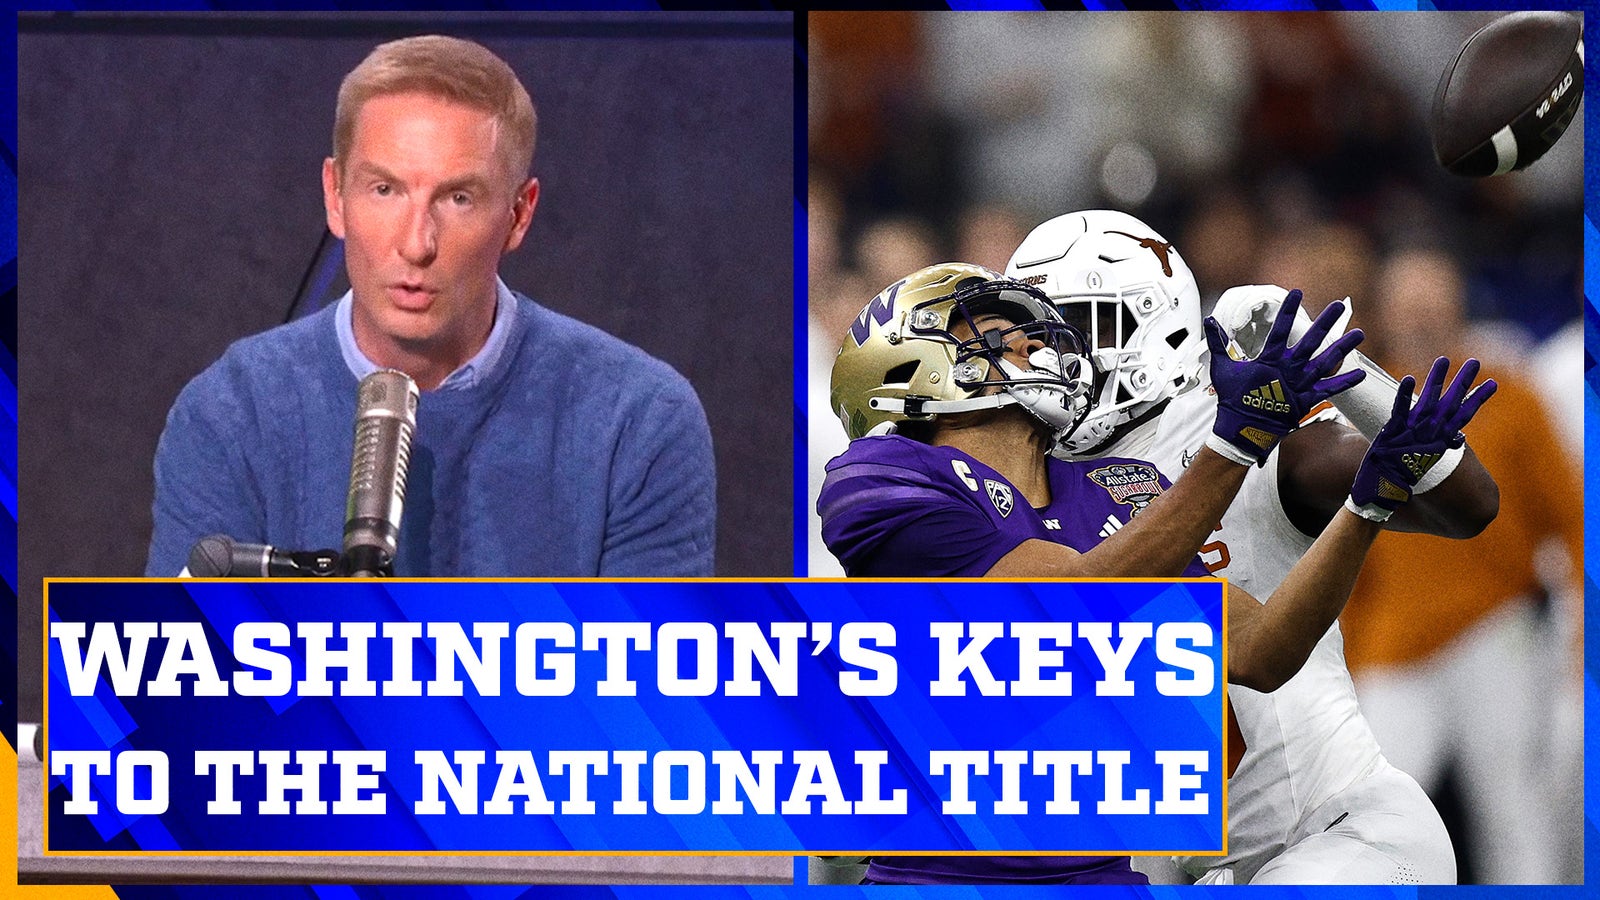 Could Washington’s passing game lead way to national title?